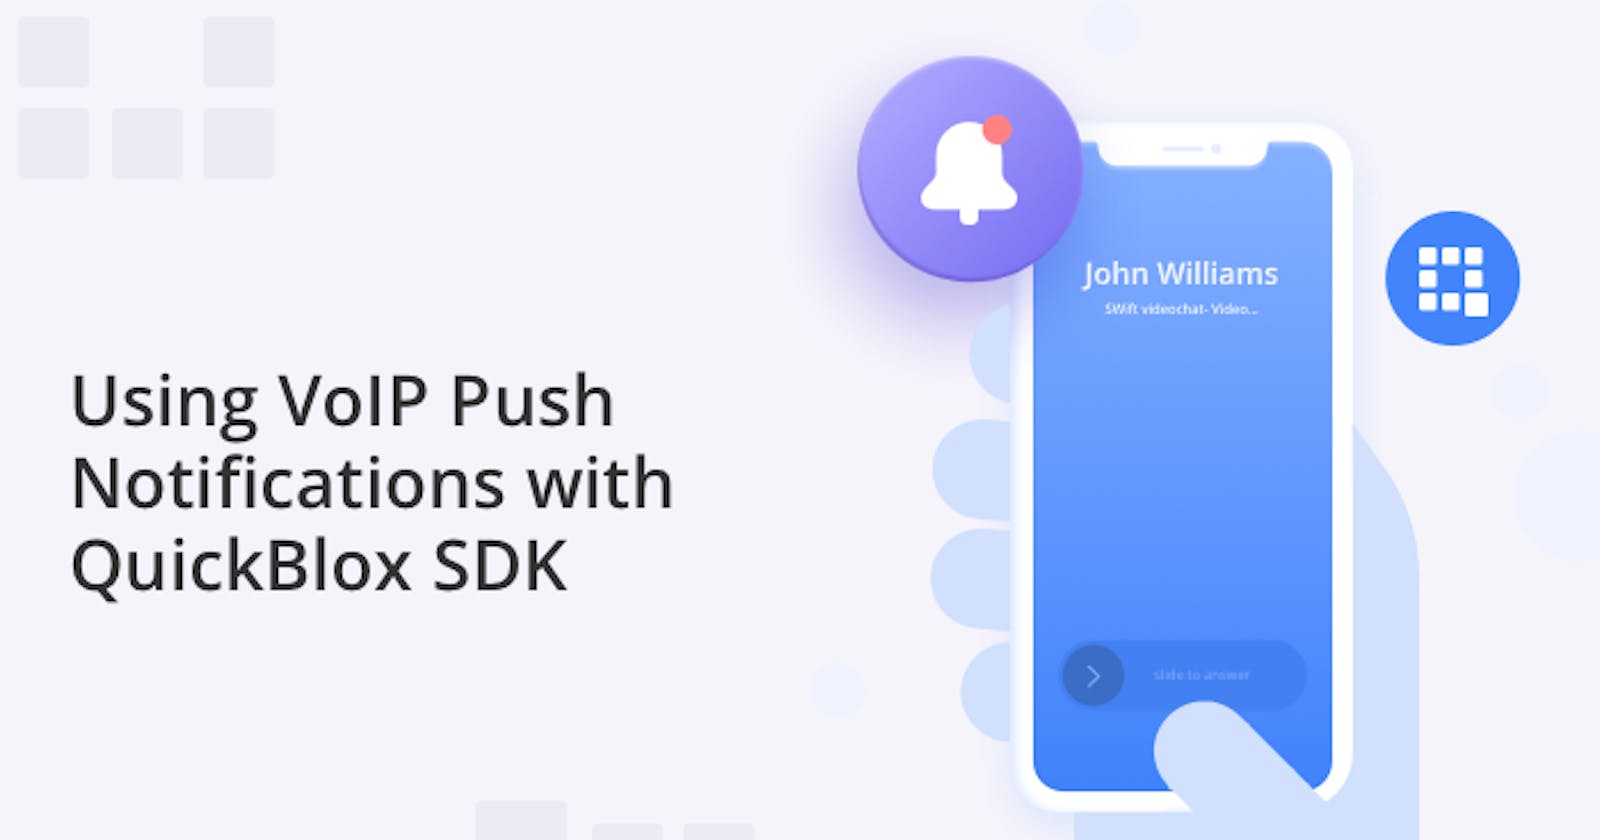 Quickblox SDK Makes It Easy to Add Push Notifications to Your iOS App